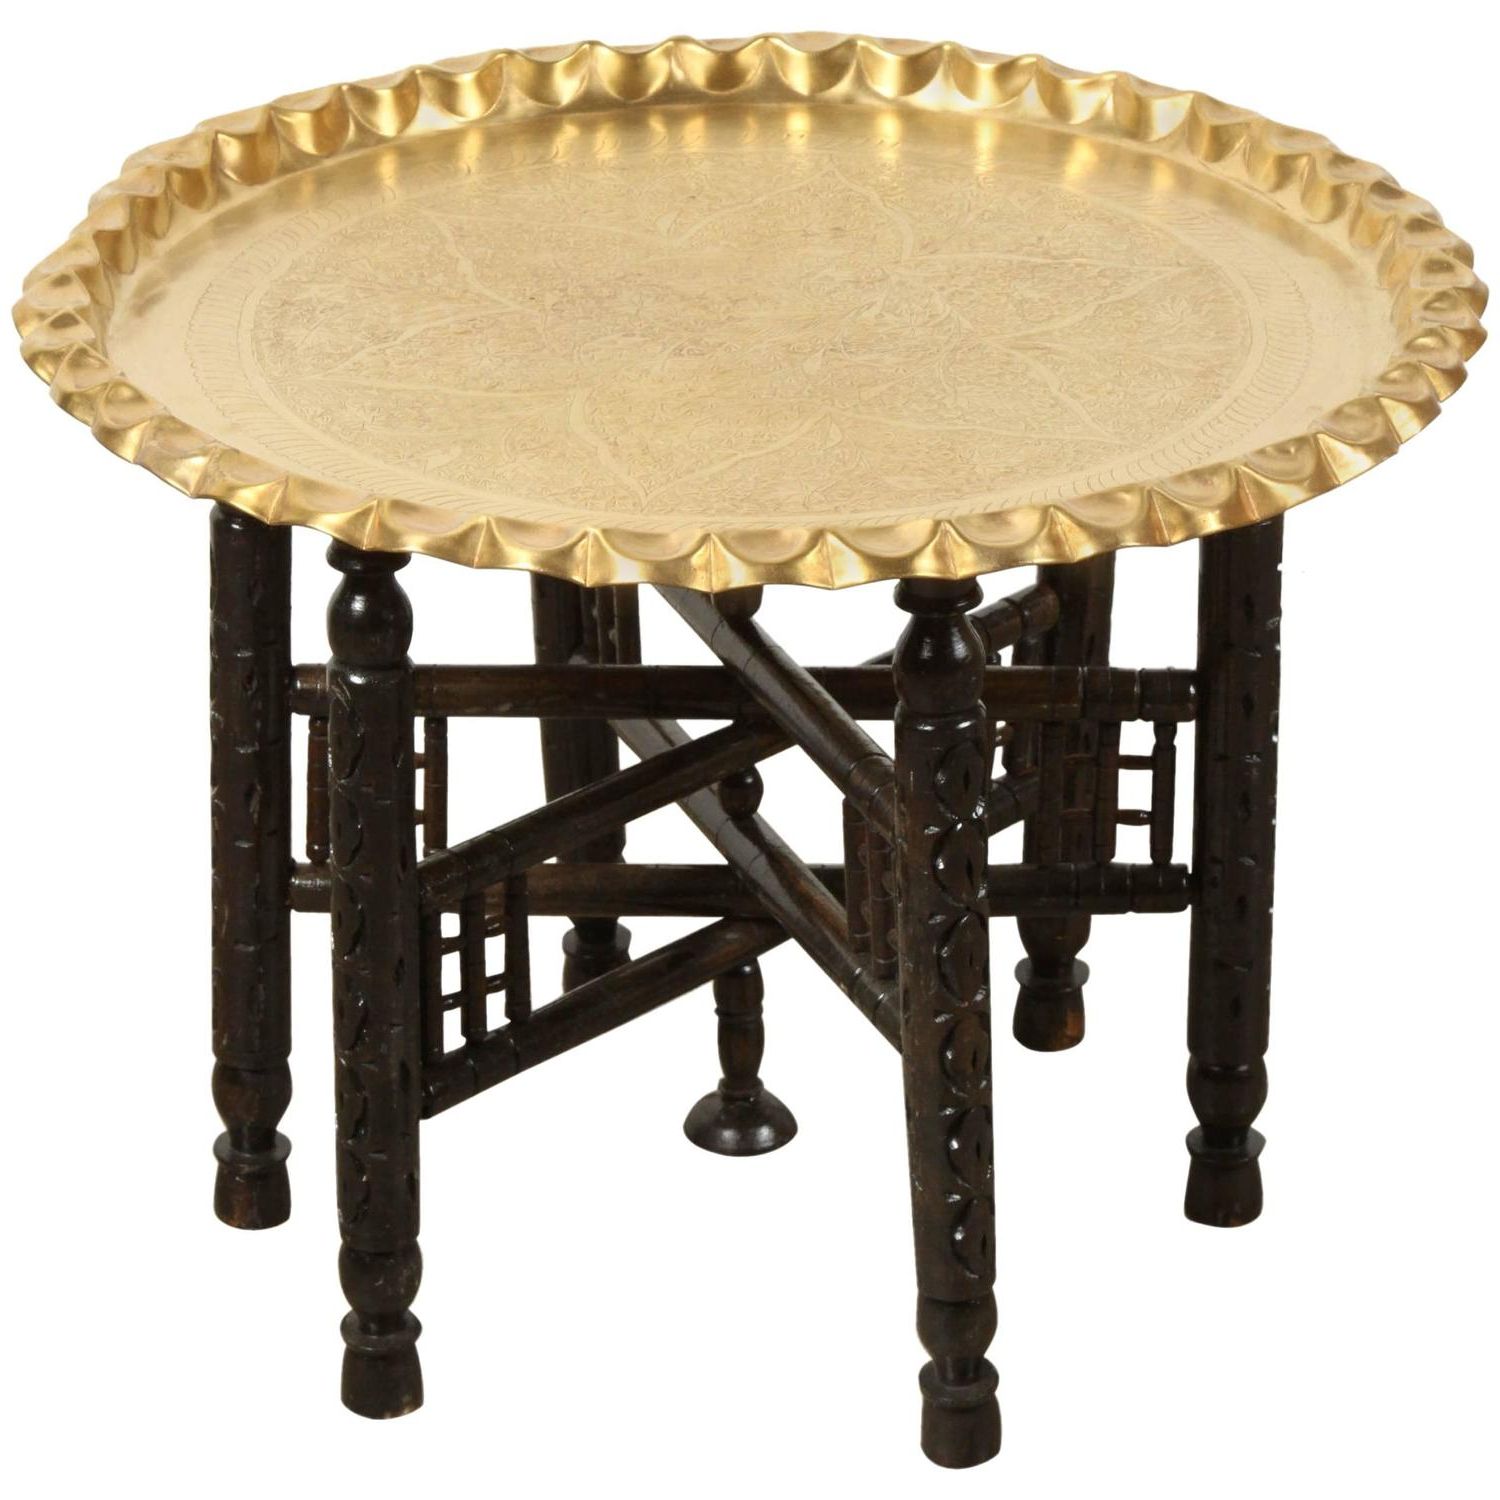 Recent Vintage Moroccan Etched Brass Round Tray Table For Sale At 1stdibs Throughout Antique Brass Aluminum Round Coffee Tables (View 5 of 10)